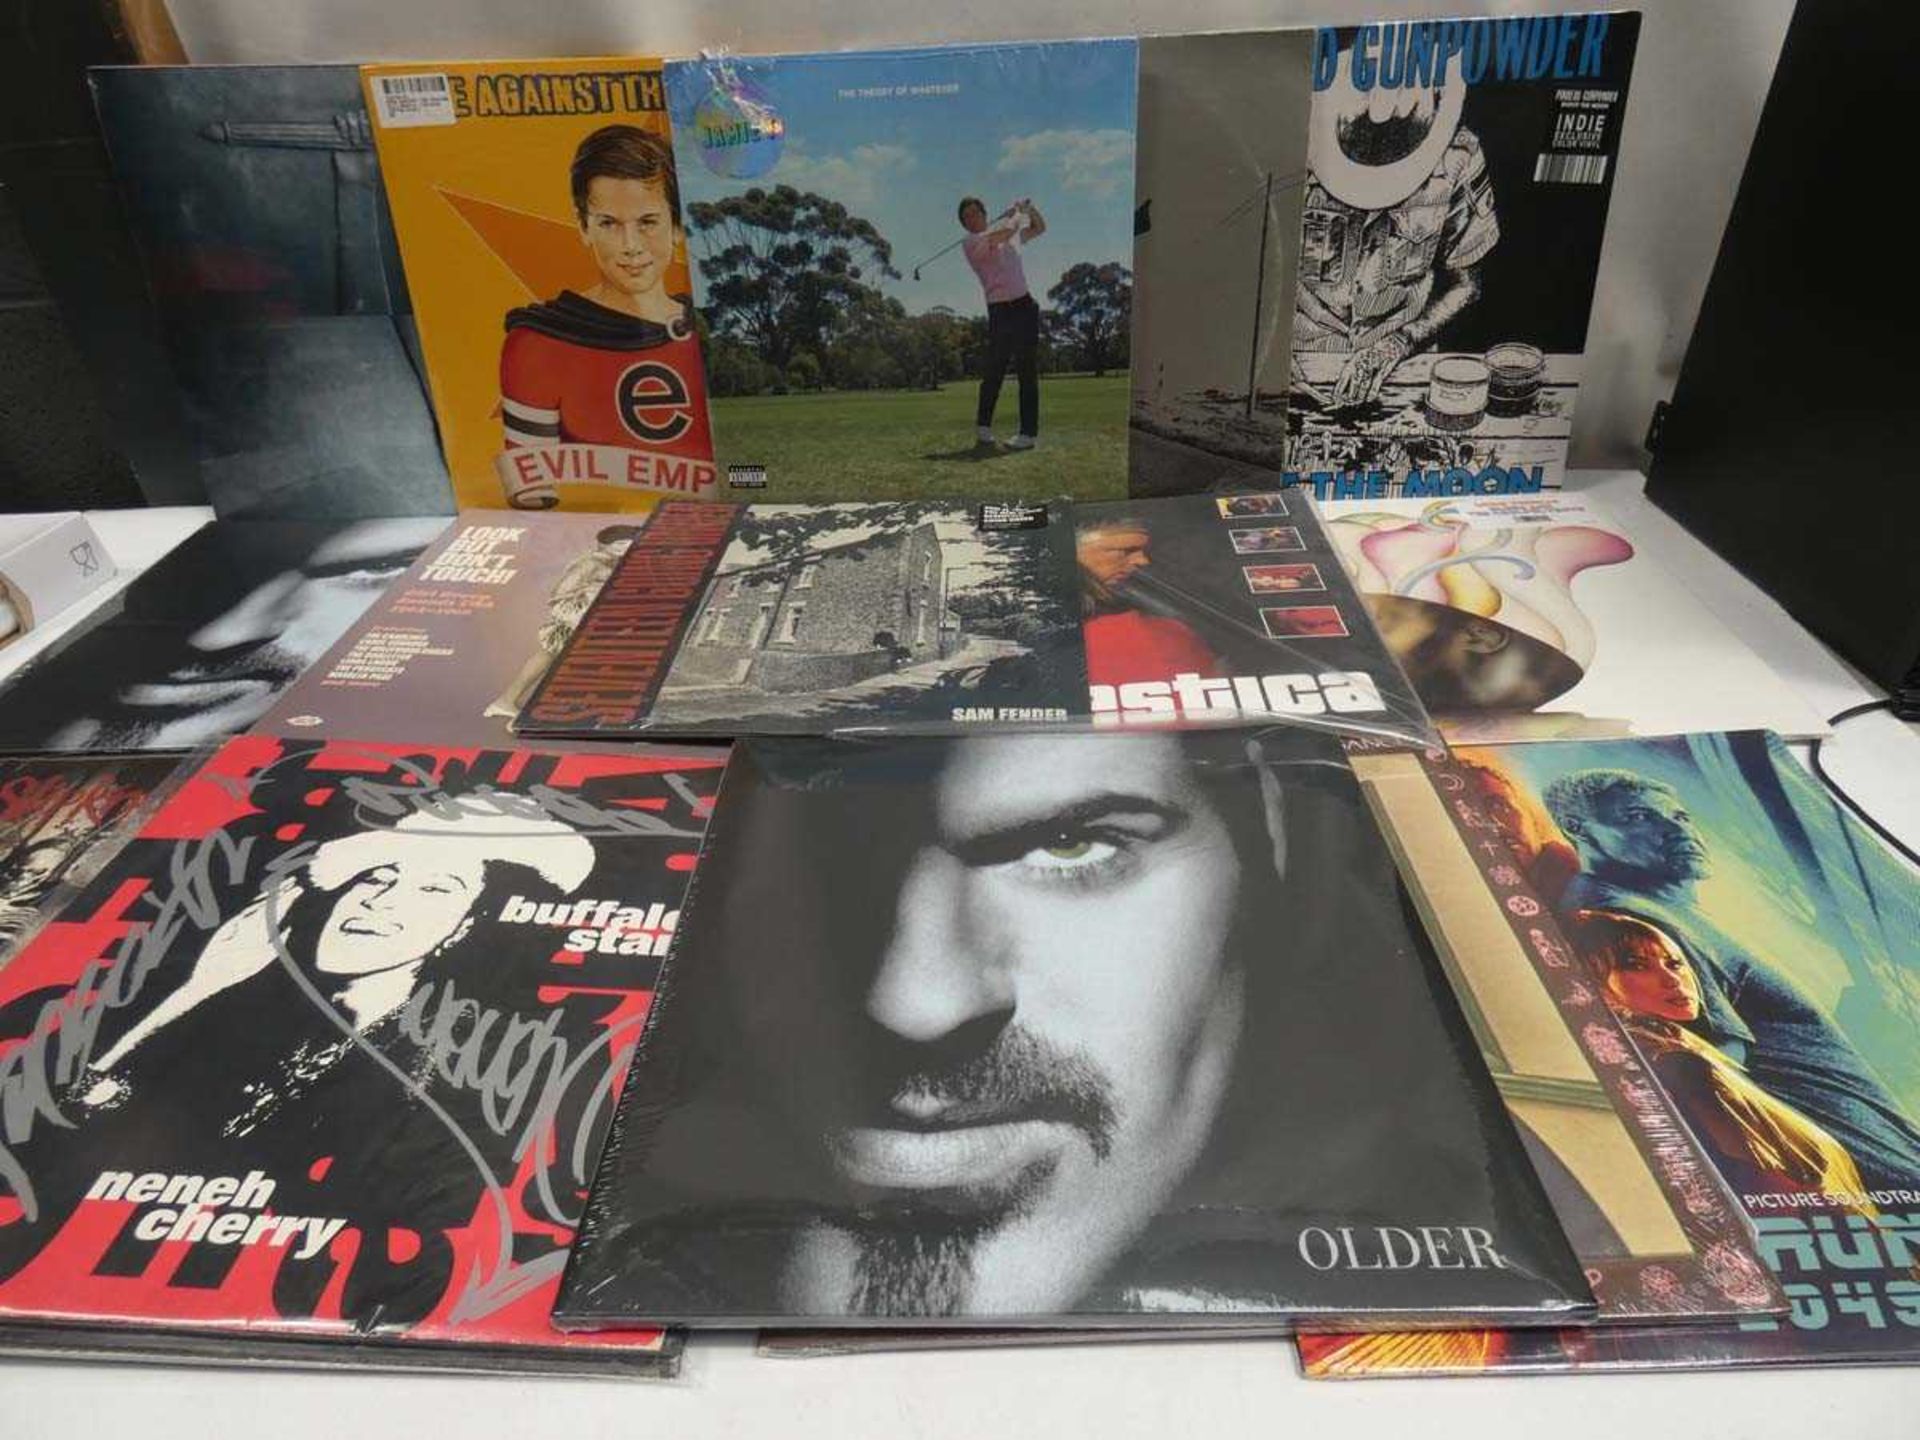 +VAT Box containing LP vinyl records to include Jamie T, Rage Against the Machine, Slipknot and